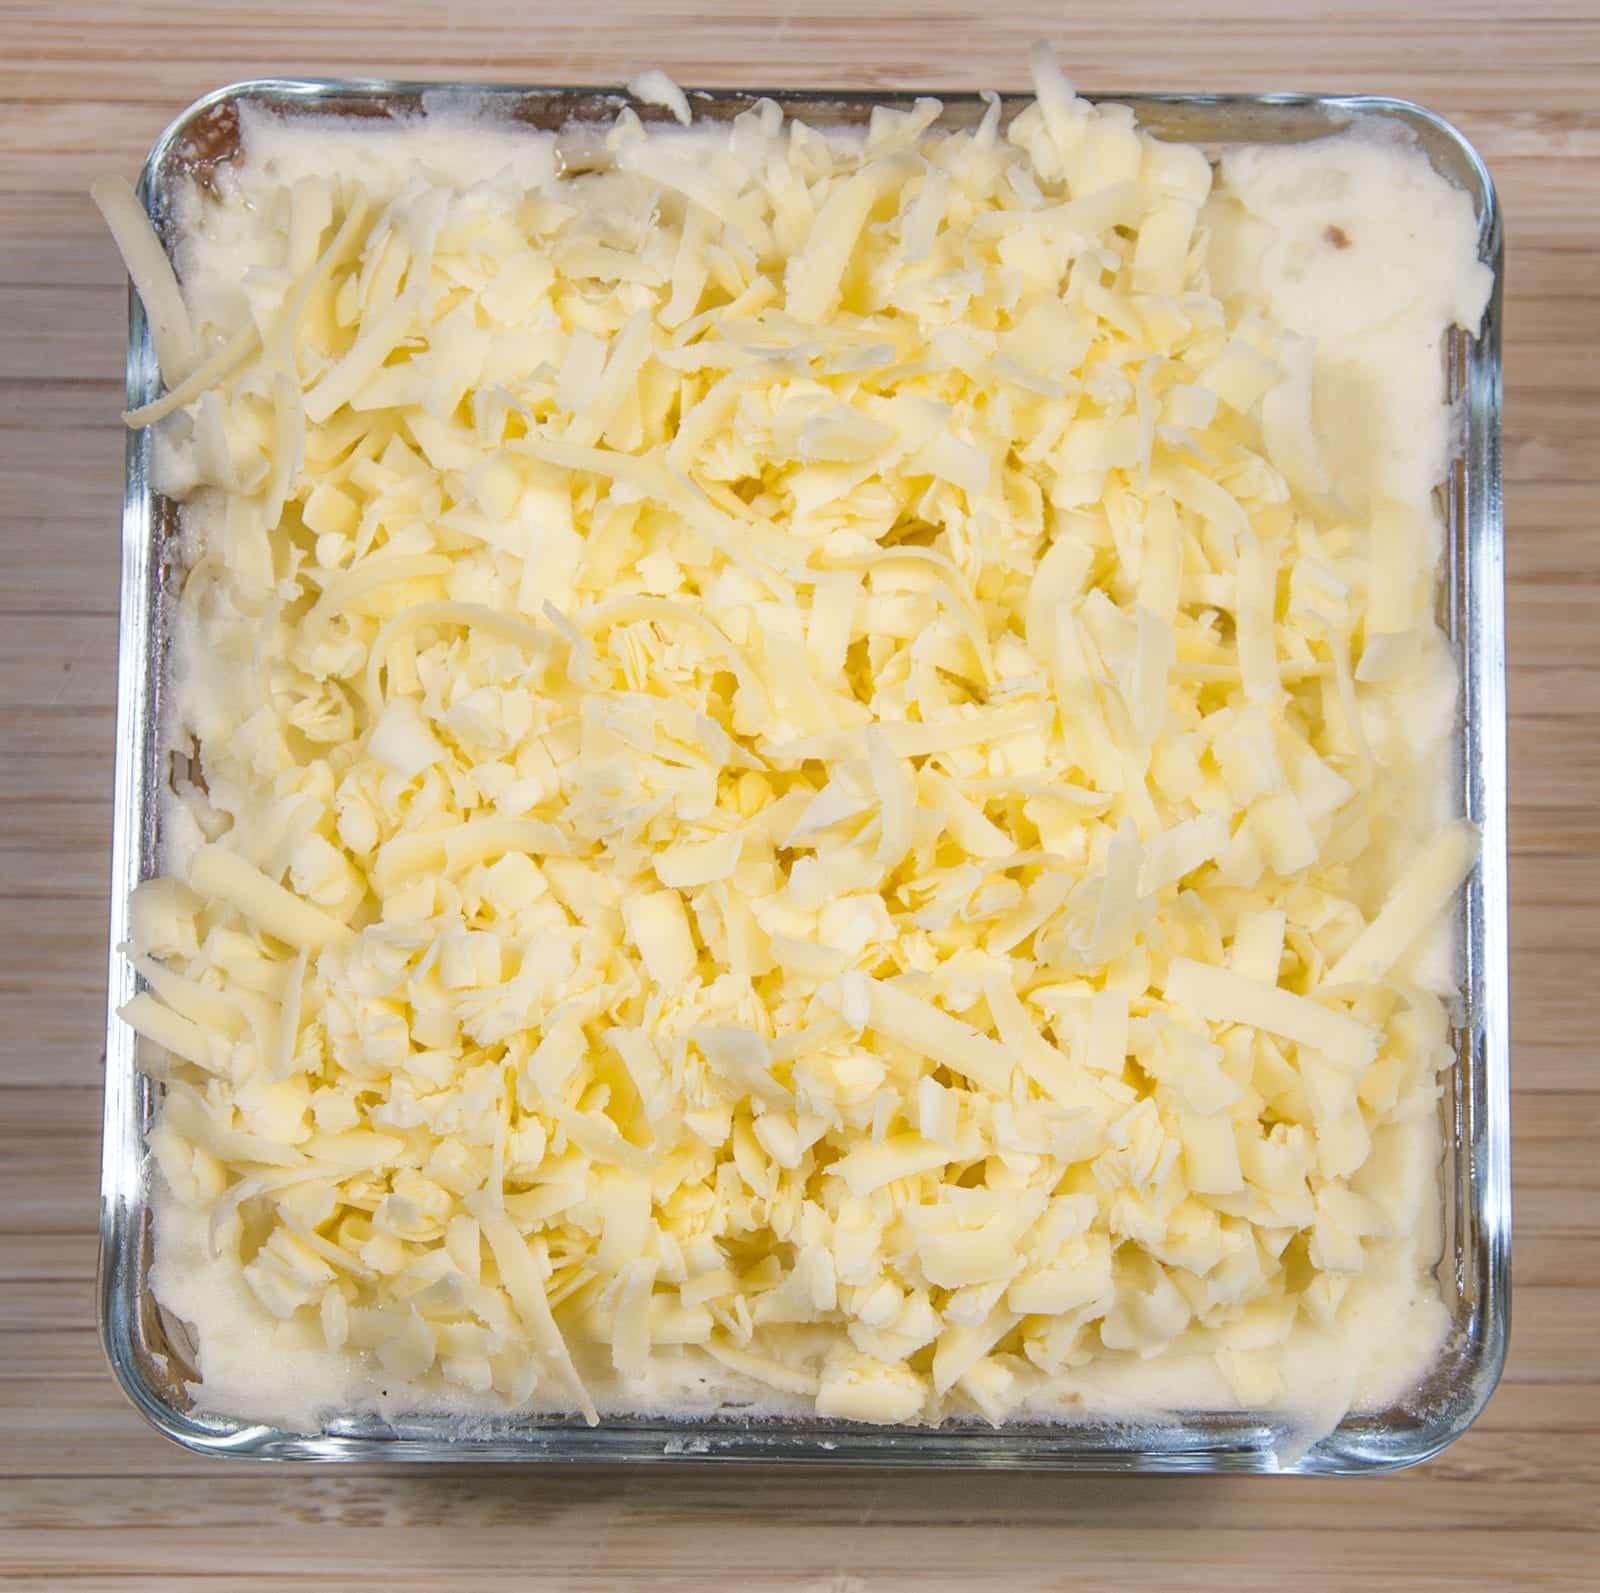 Cheddar topped shepherd's pie. Add the grated cheese | https://theyumyumclub.com/2019/05/16/cheddar-topped-shepherds-pie/